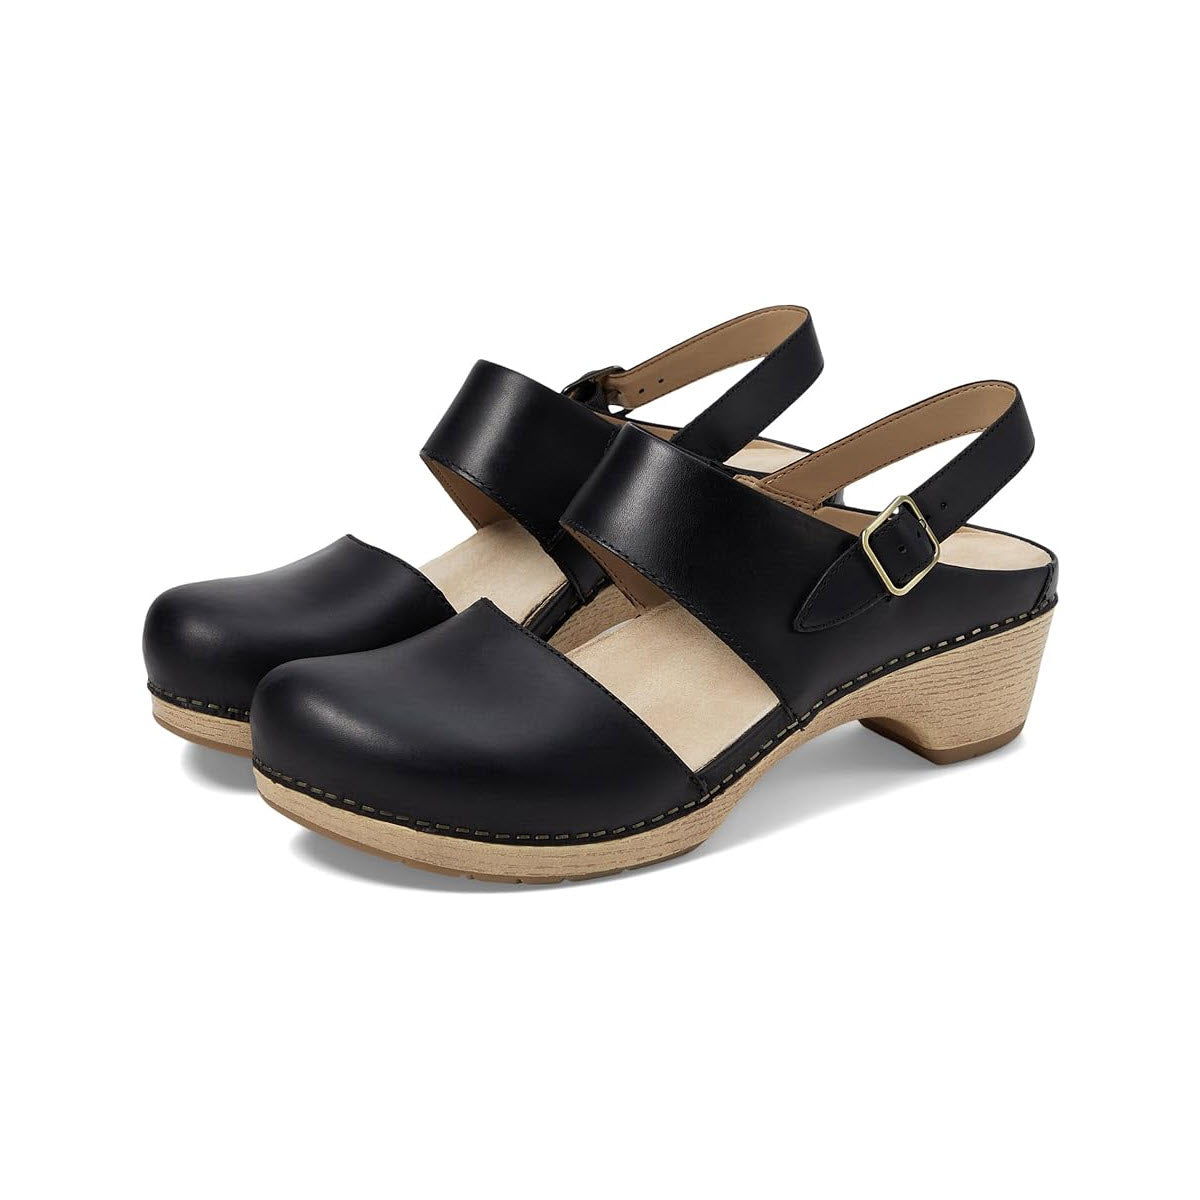 A pair of Dansko Lucia Black women&#39;s leather heeled sandals with an adjustable heel strap against a white background.